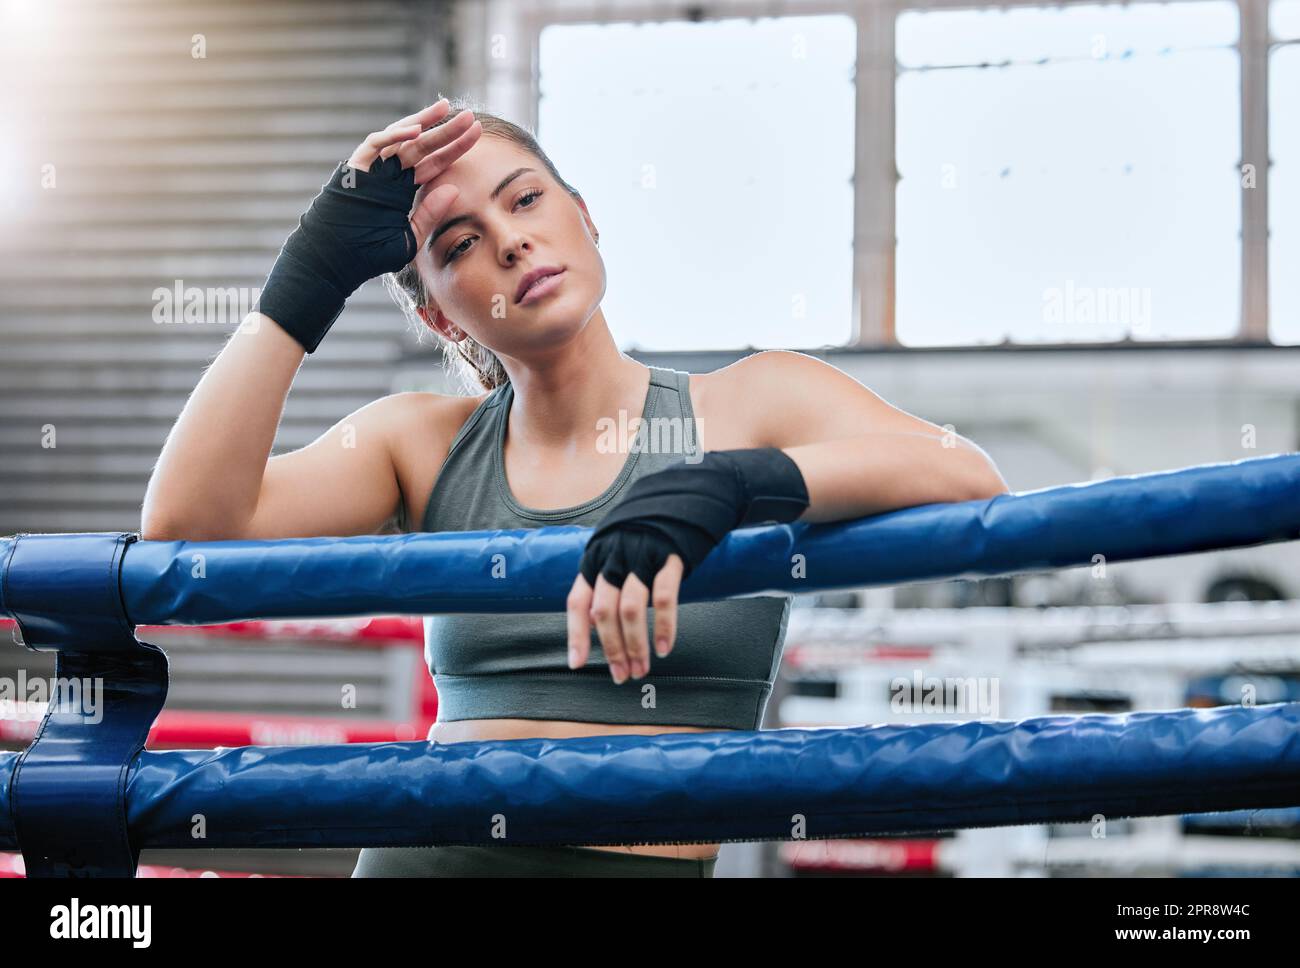 Confident, active and toned female fitness athlete in a boxing ring after a fight, match or sparring session in a gym. A healthy, fit and strong woman ready to exercise, workout and do training Stock Photo